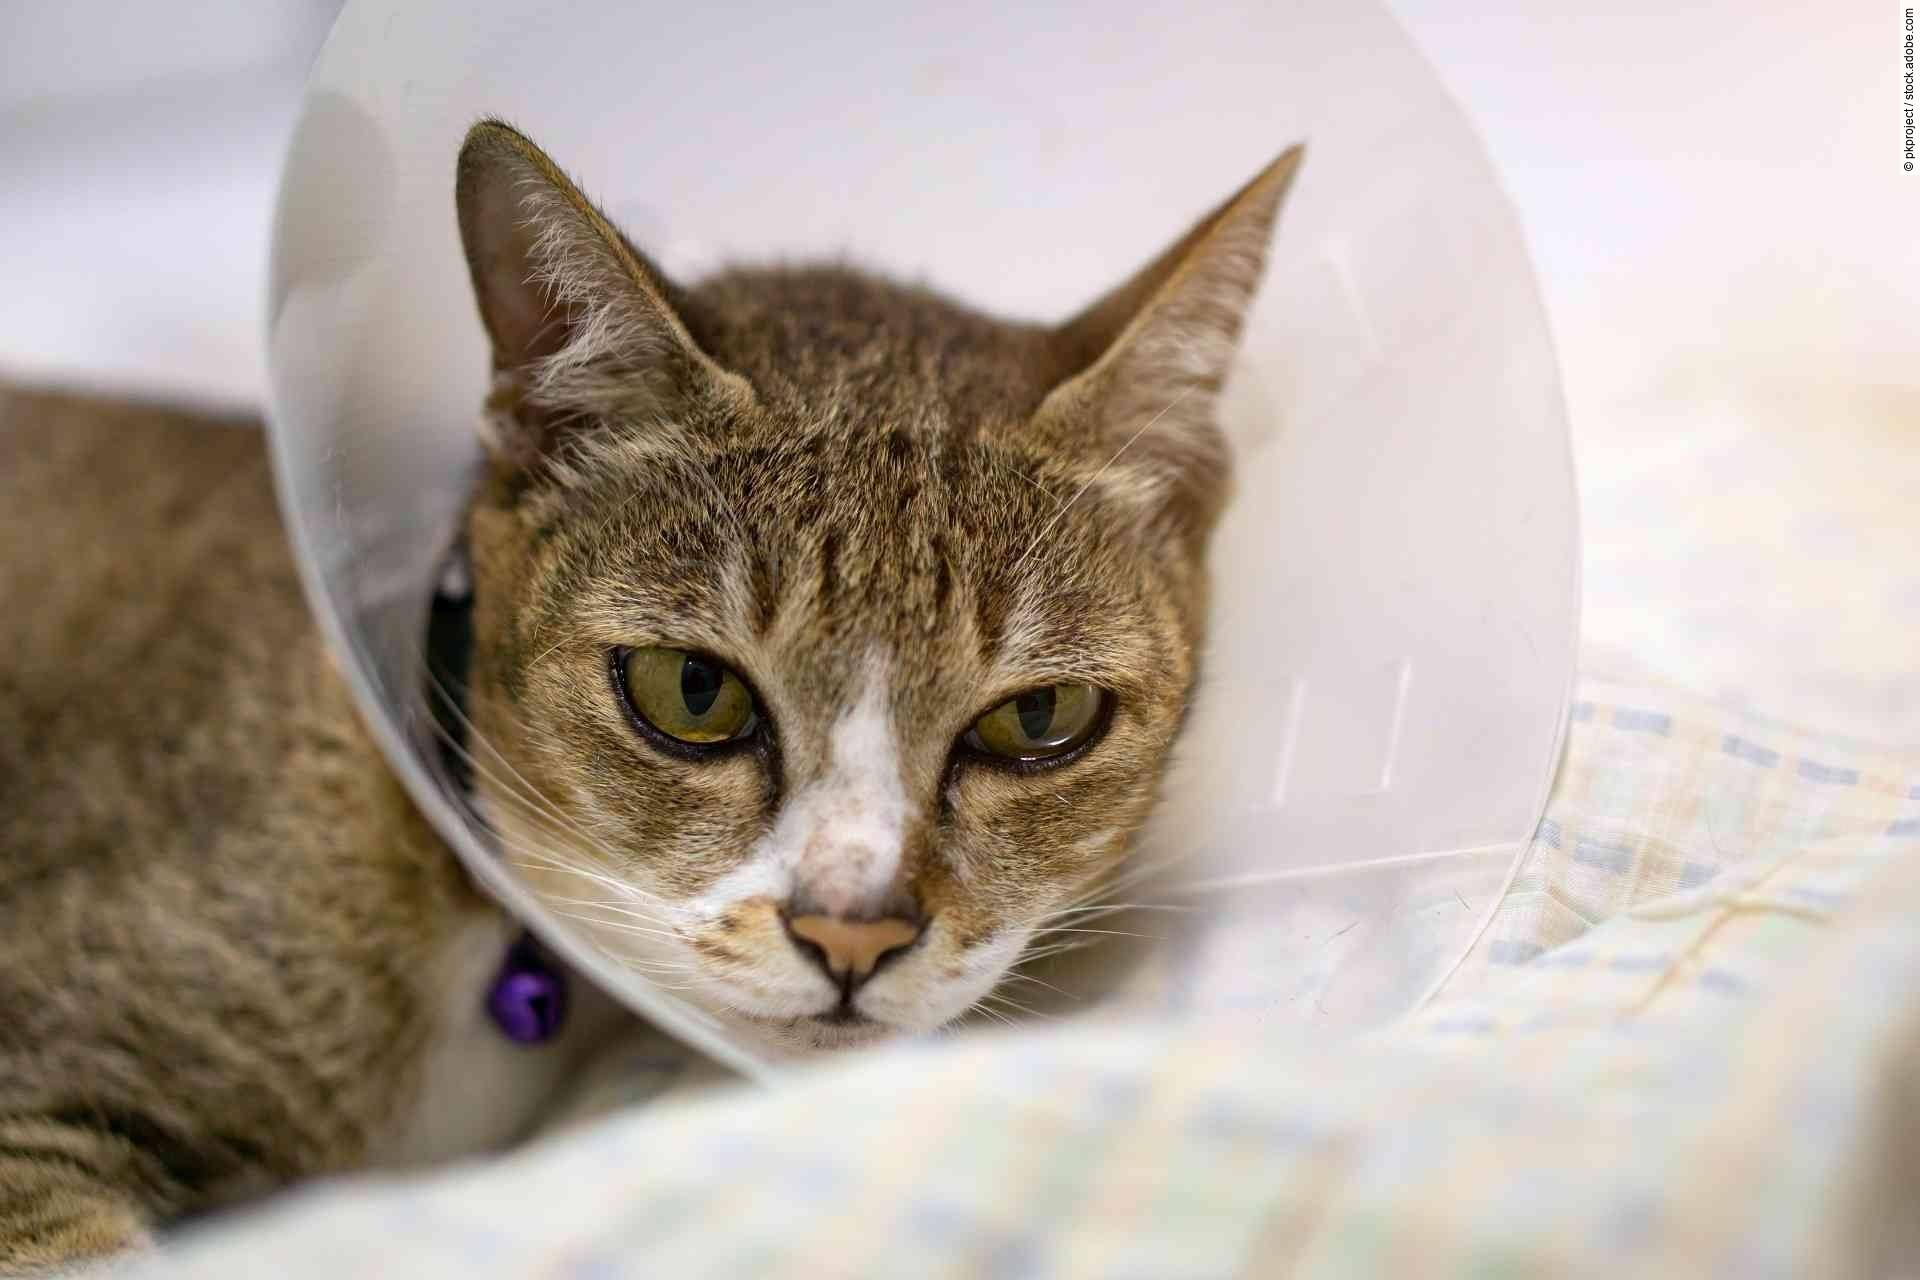 Sick cat with veterinary cone on its head to protect cat from licking a wound.